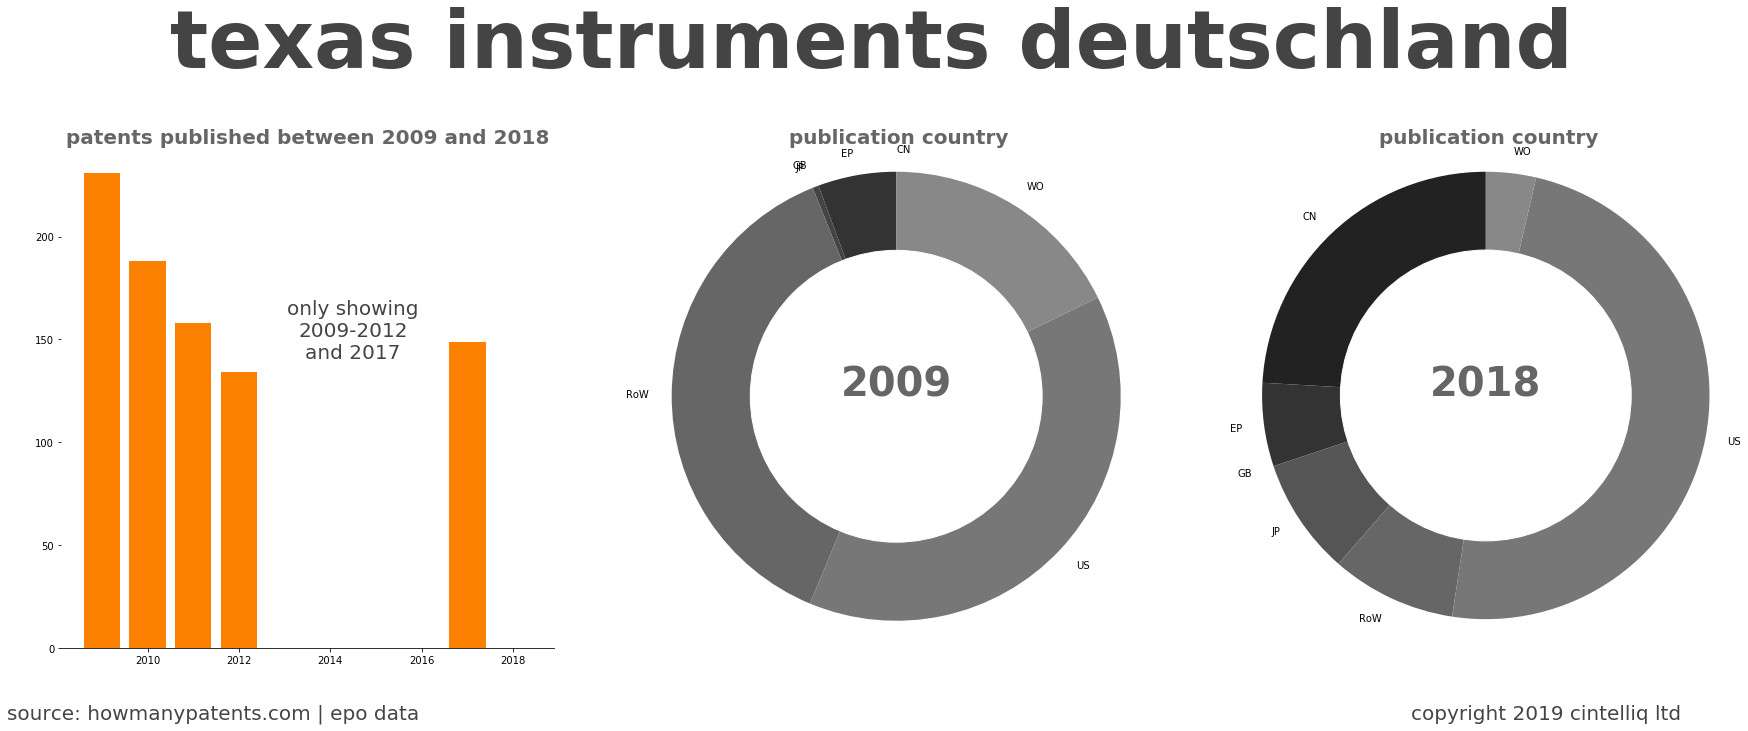 summary of patents for Texas Instruments Deutschland